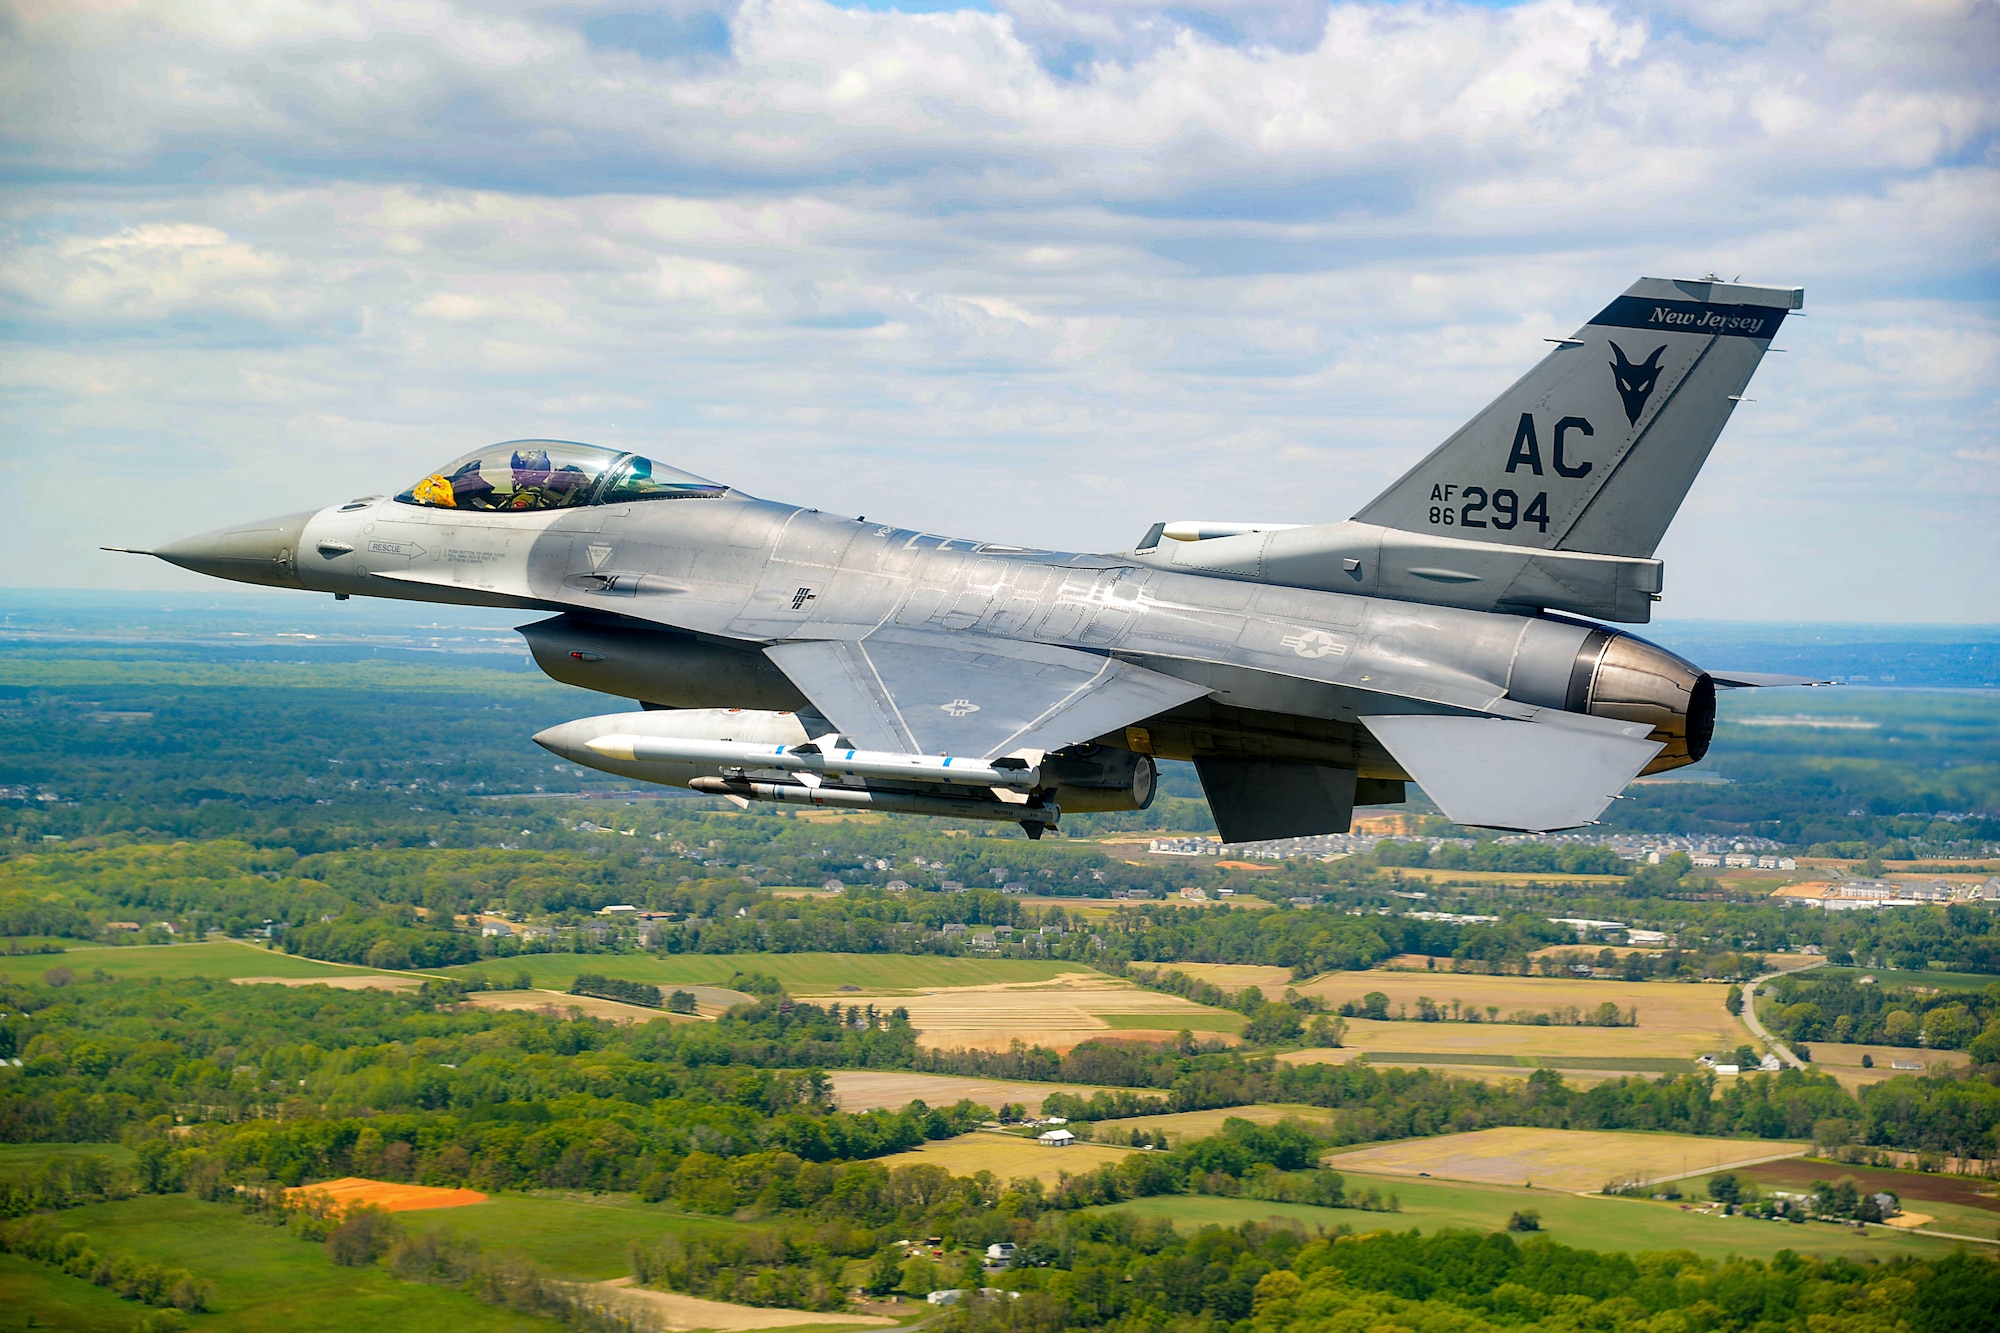 An image of a New Jersey Air National Guard F-16 Fighting Falcon flying.